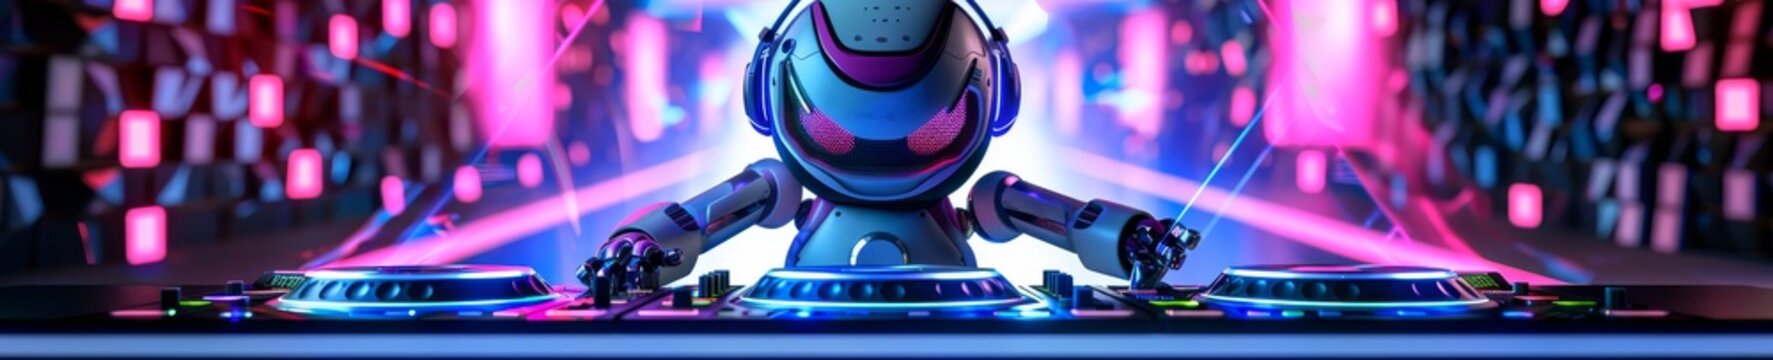 A cute 3D robot as a DJ, spinning decks with its robotic arms, head bobbing to the beat under neon lights